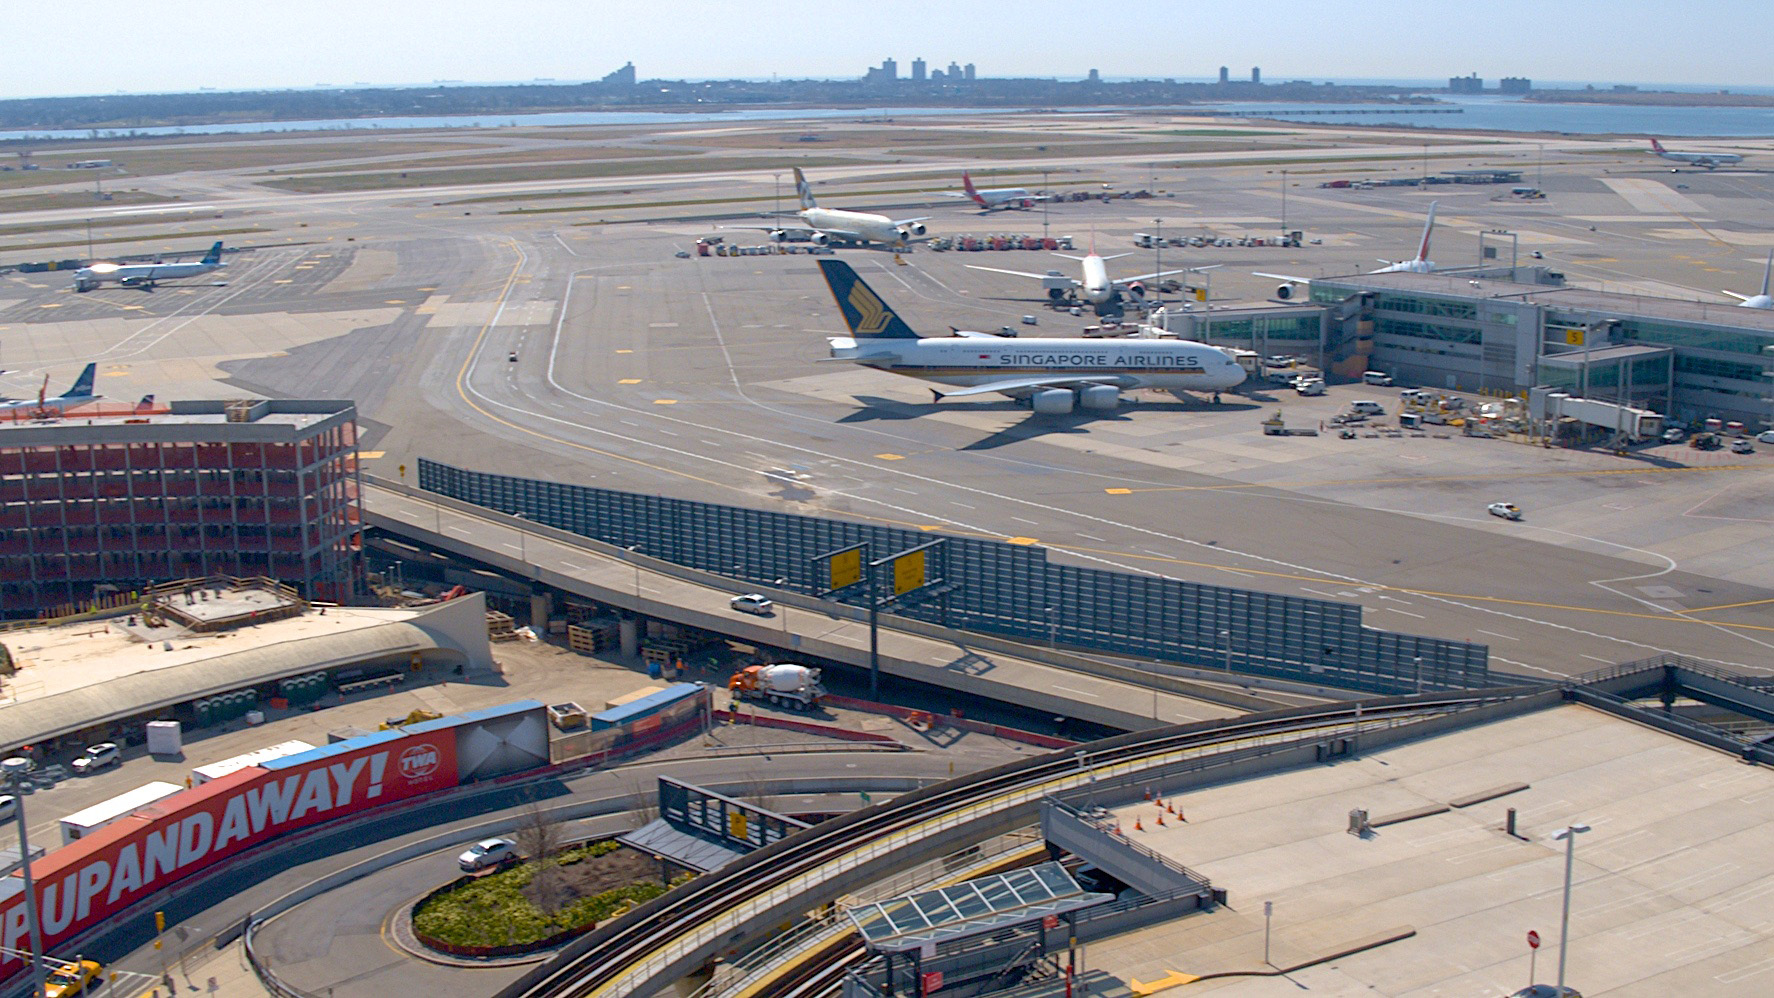 A view of the ramps and runways at John F. Kennedy International Airport, captured in April by an unmanned aircraft. Photo courtesy of Cinematic Aerospace. 